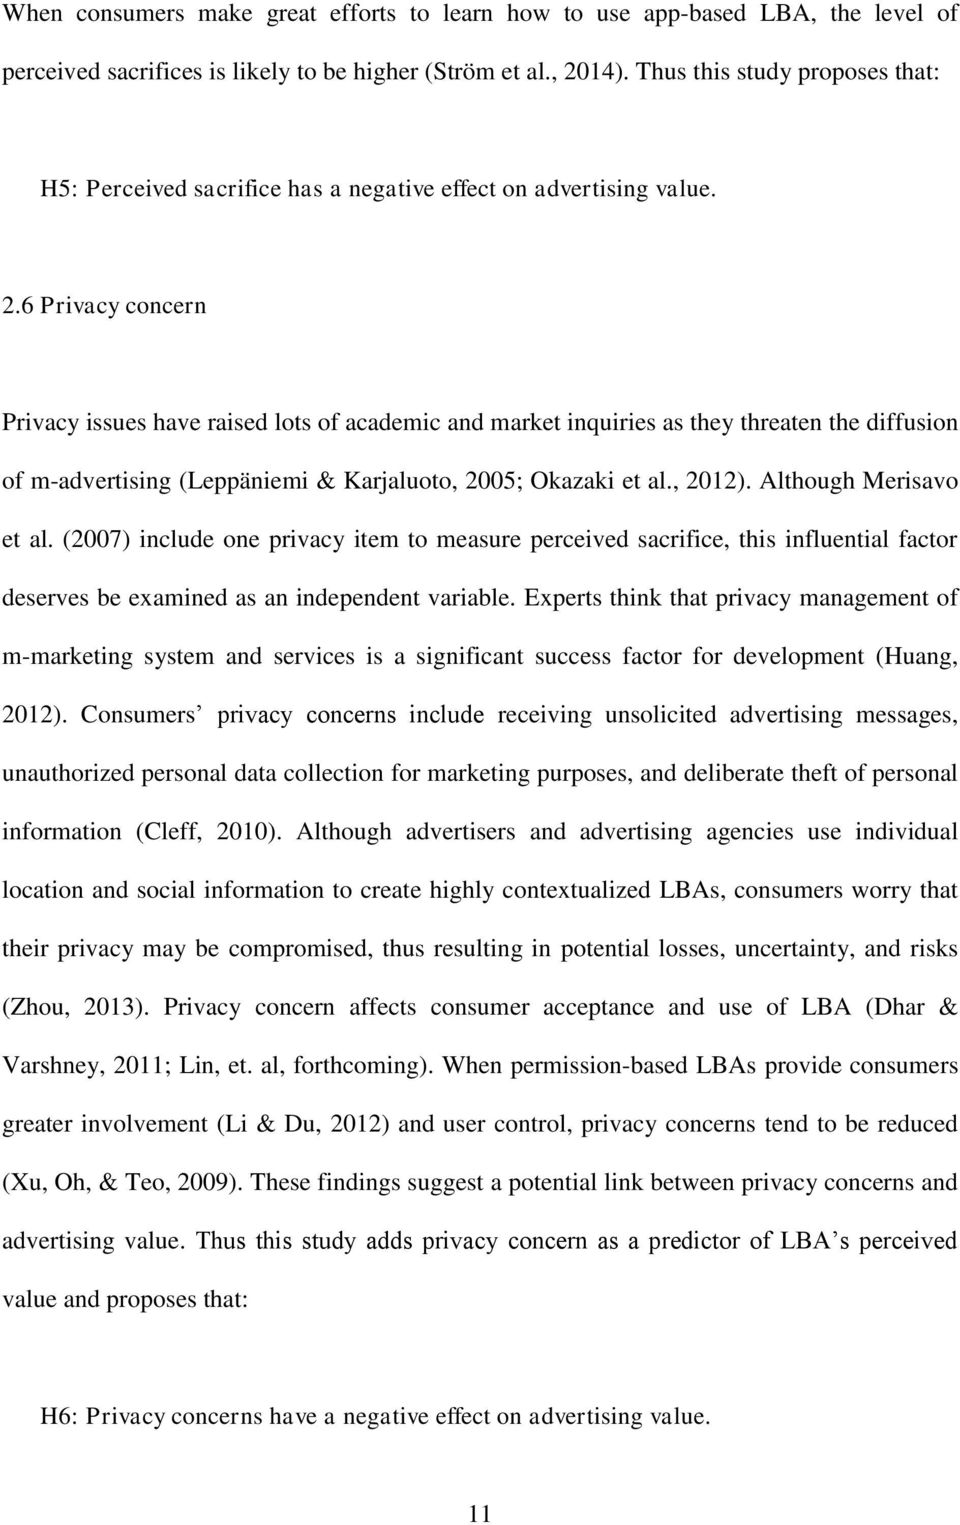 6 Privacy concern Privacy issues have raised lots of academic and market inquiries as they threaten the diffusion of m-advertising (Leppäniemi & Karjaluoto, 2005; Okazaki et al., 2012).